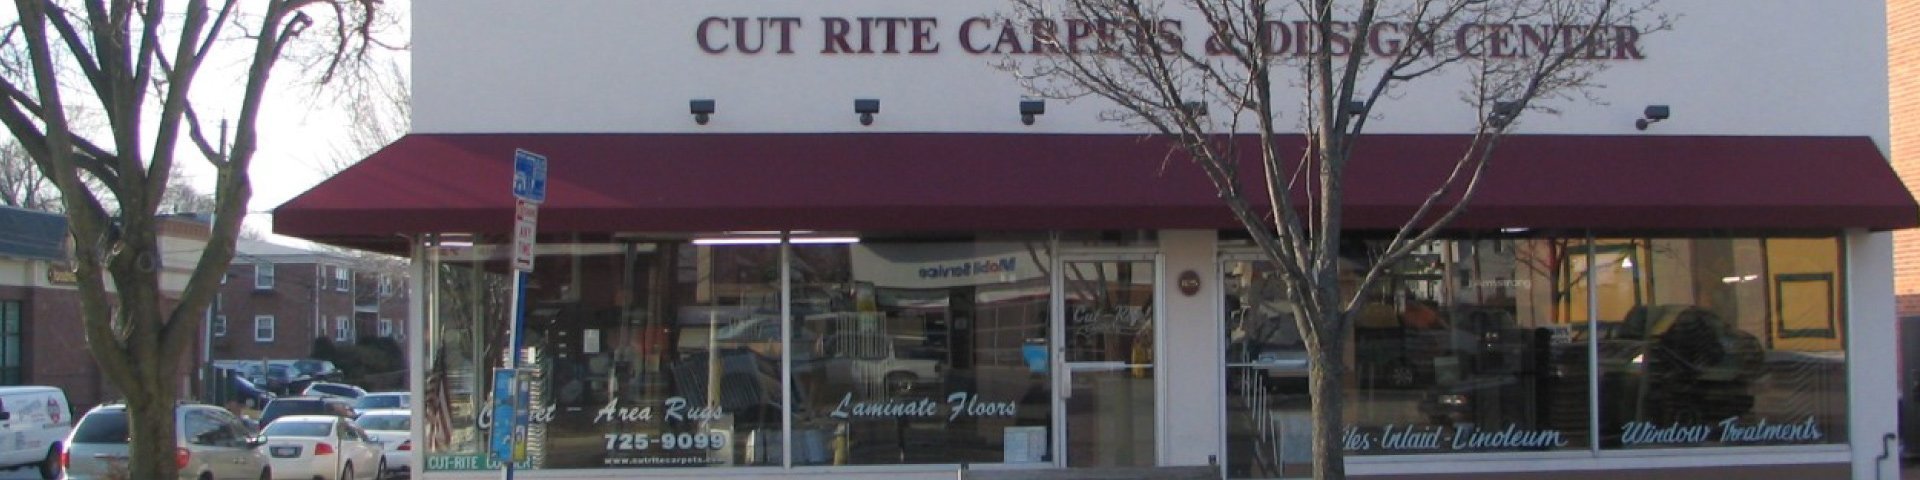 Cut-rite Carpets | Promo Banner Of Storefront